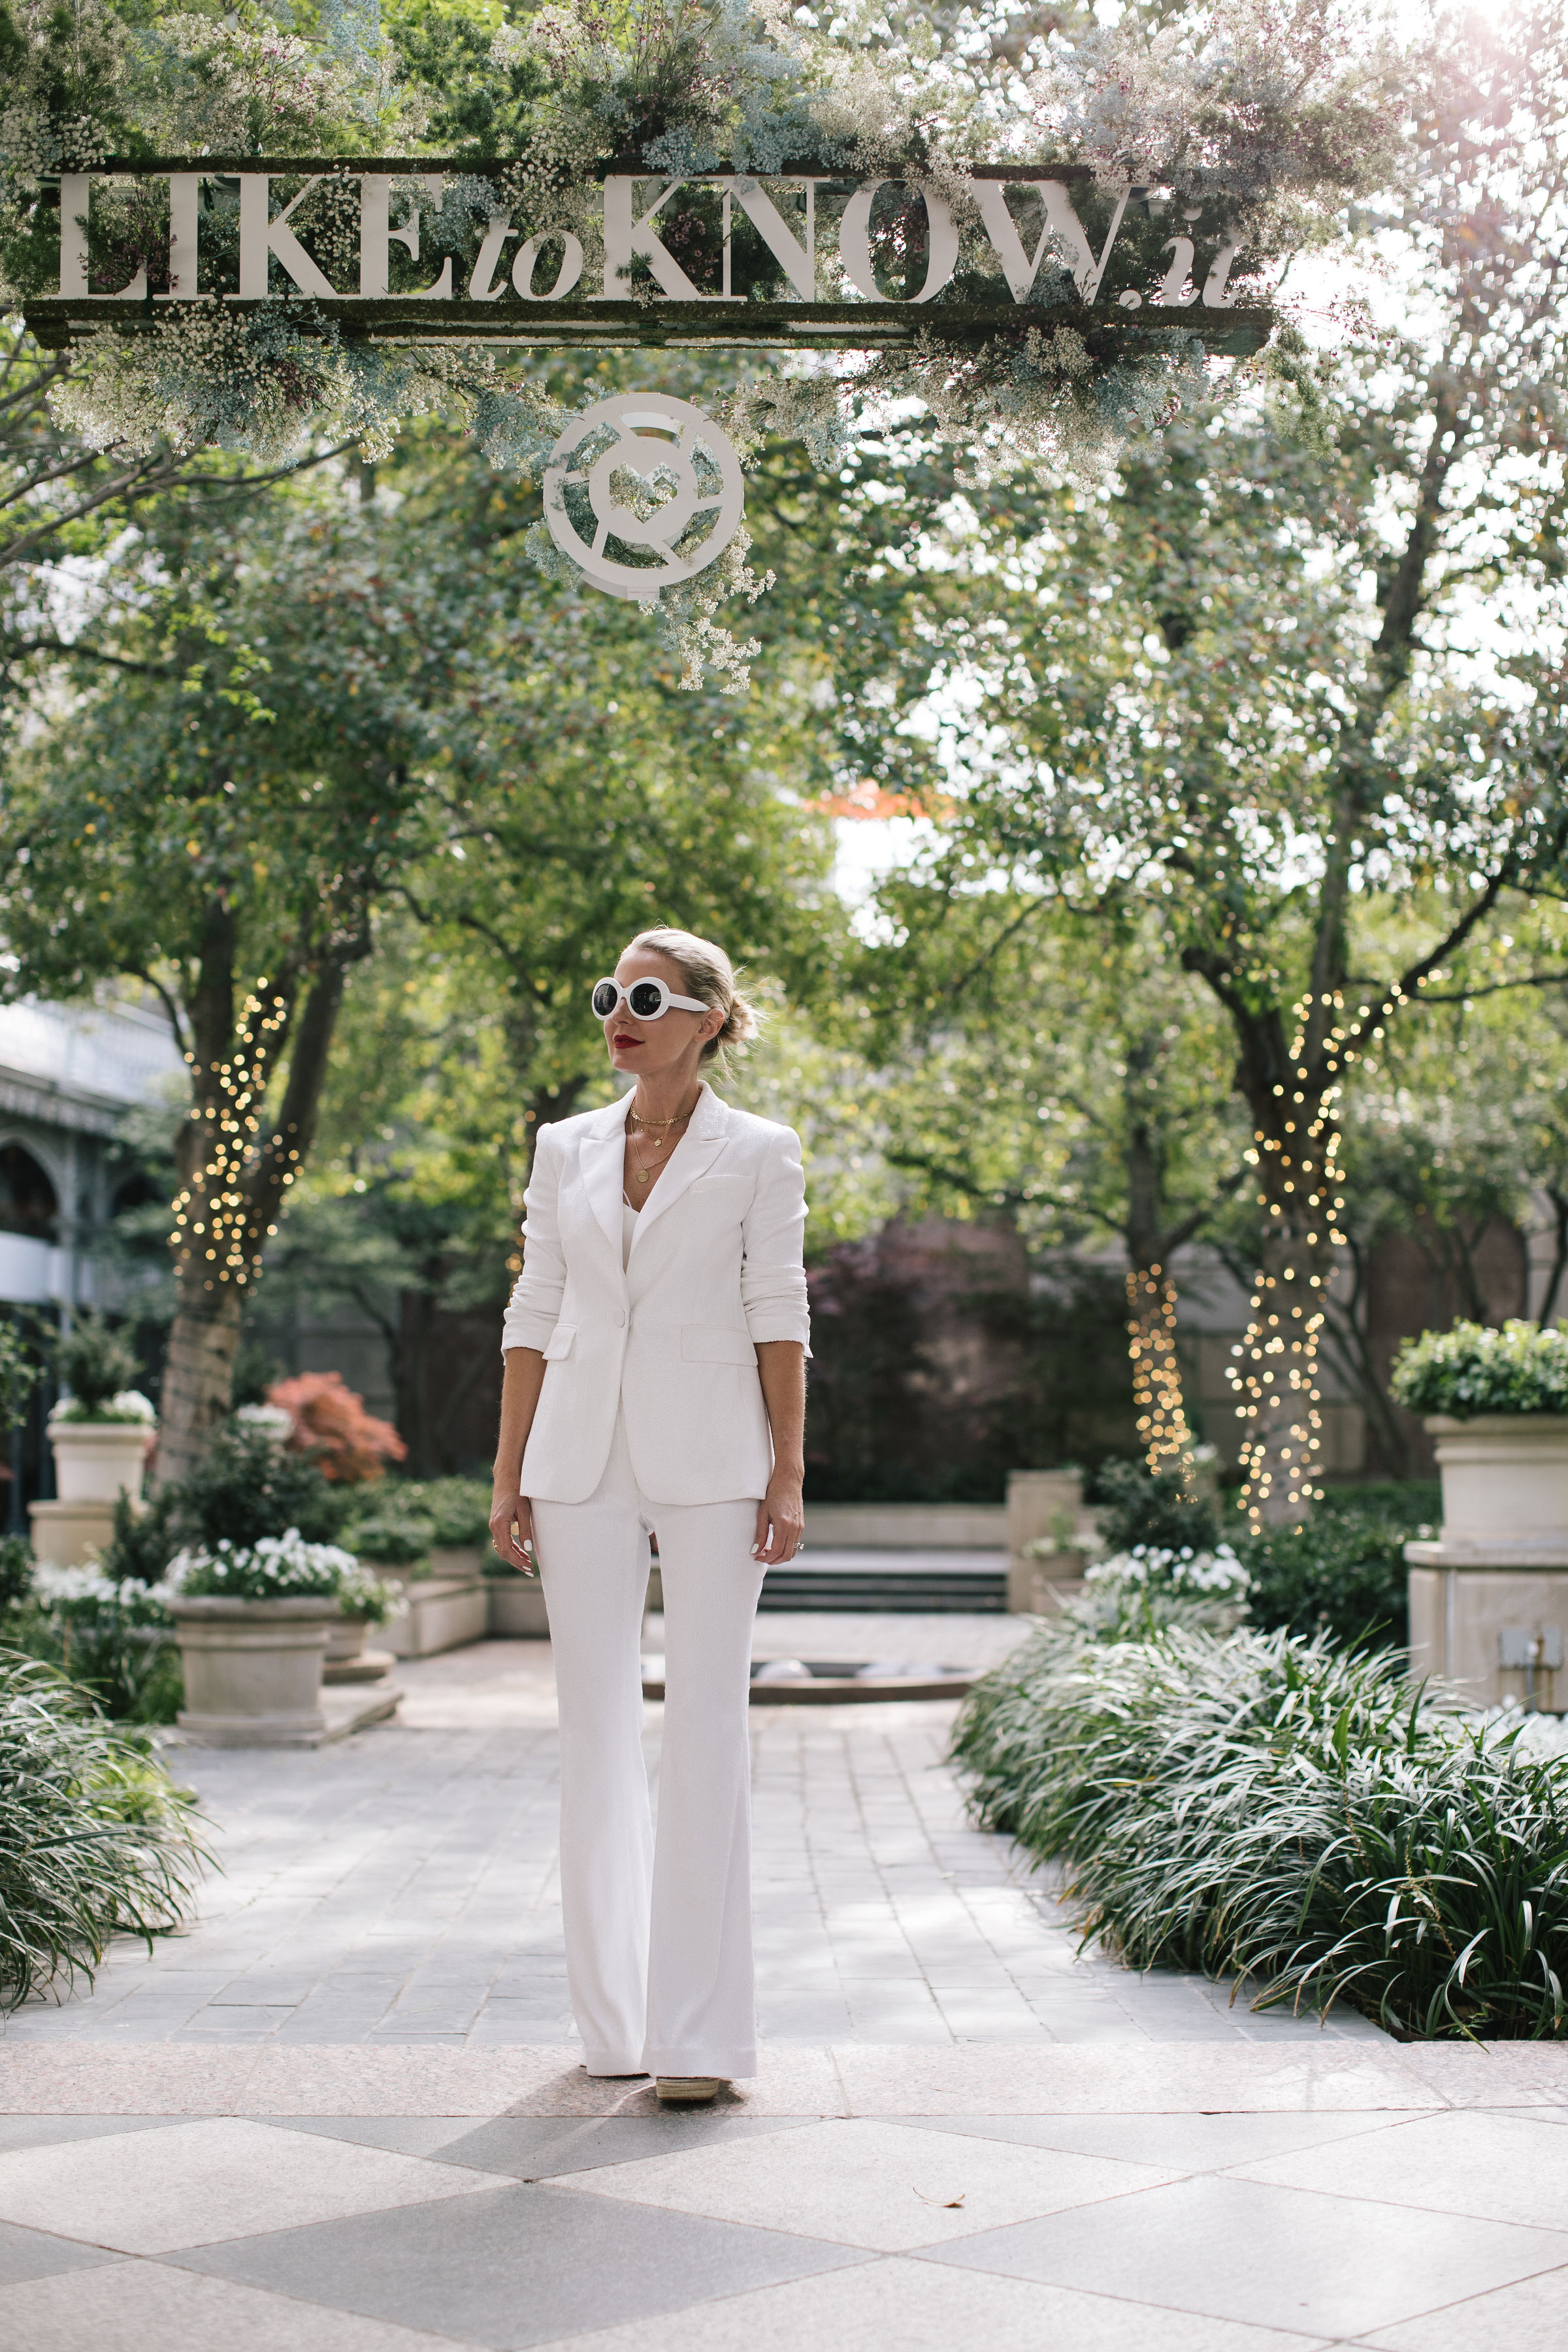 Perfect White Suit, Fashion blogger Erin Busbee of BusbeeStyle.com wearing a matching white sequin blazer and wide leg pants by Rachel Zoe, white pointed toe pumps, and a white chloe nile bag in Dallas, Texas